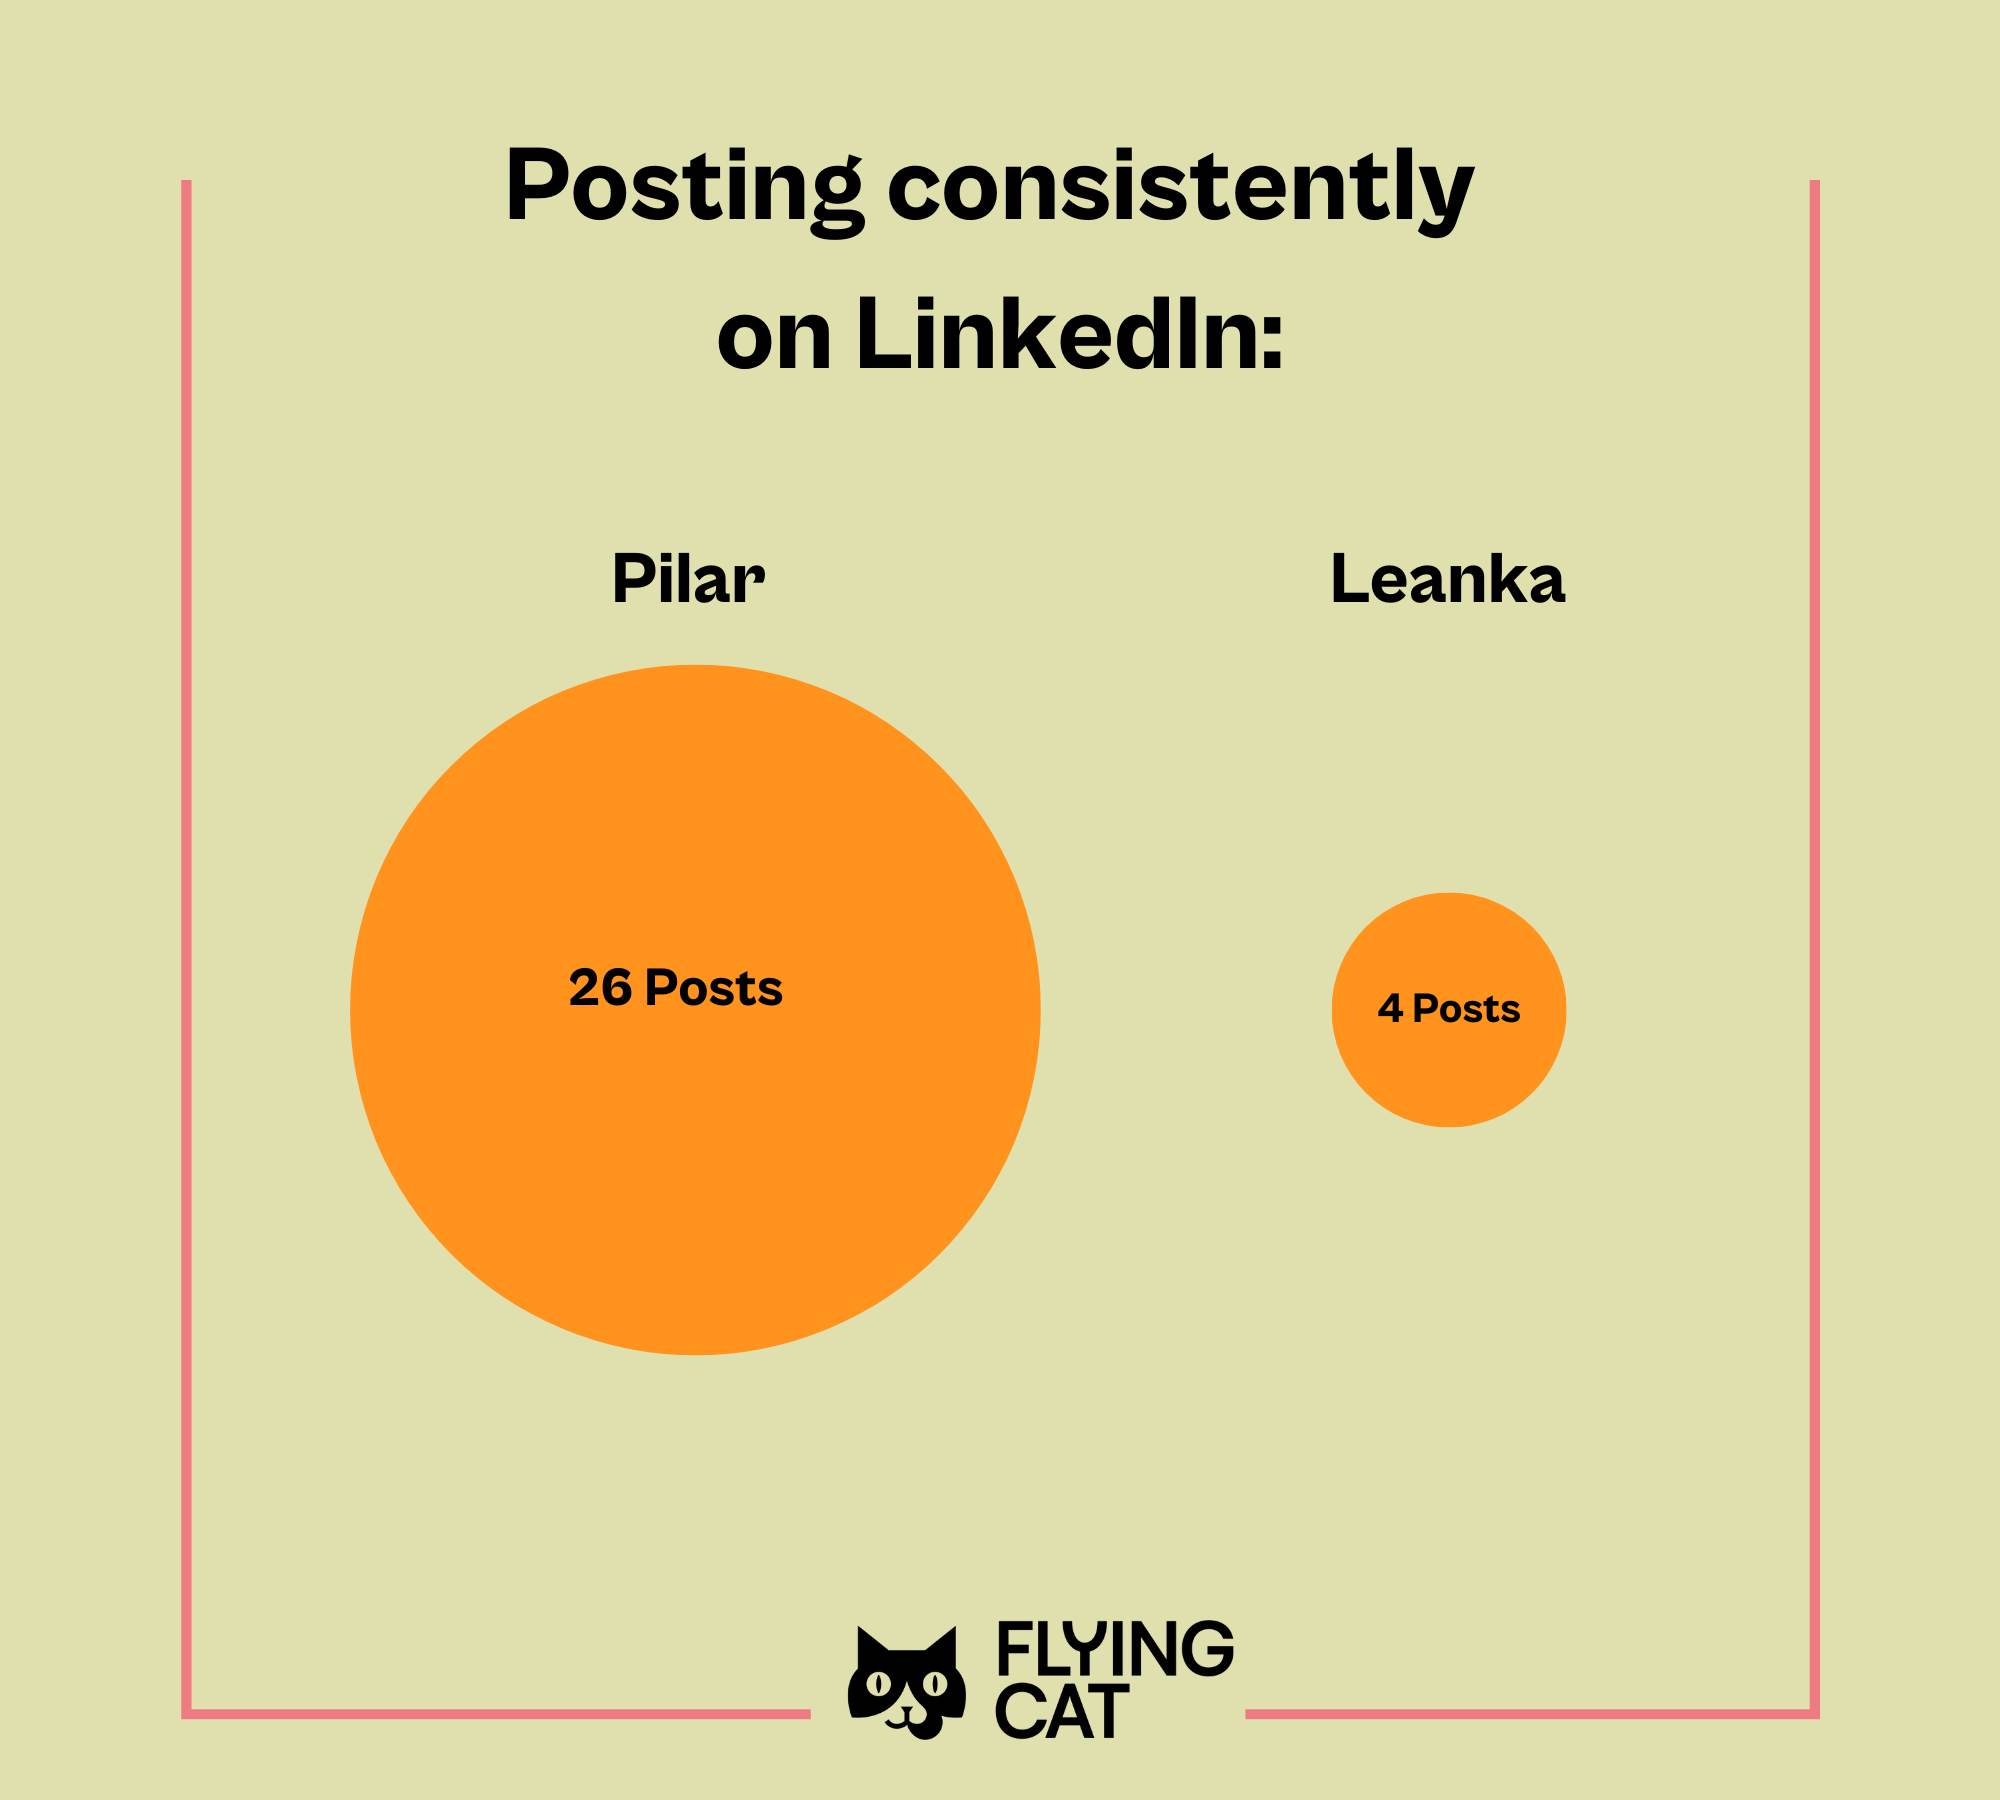 Comparison image of Pilar and Leanka and their number of  LinkedIn Posts. Pilar posts consistently and has already published 26 posts, Leanka only has published 4 posts this year.  